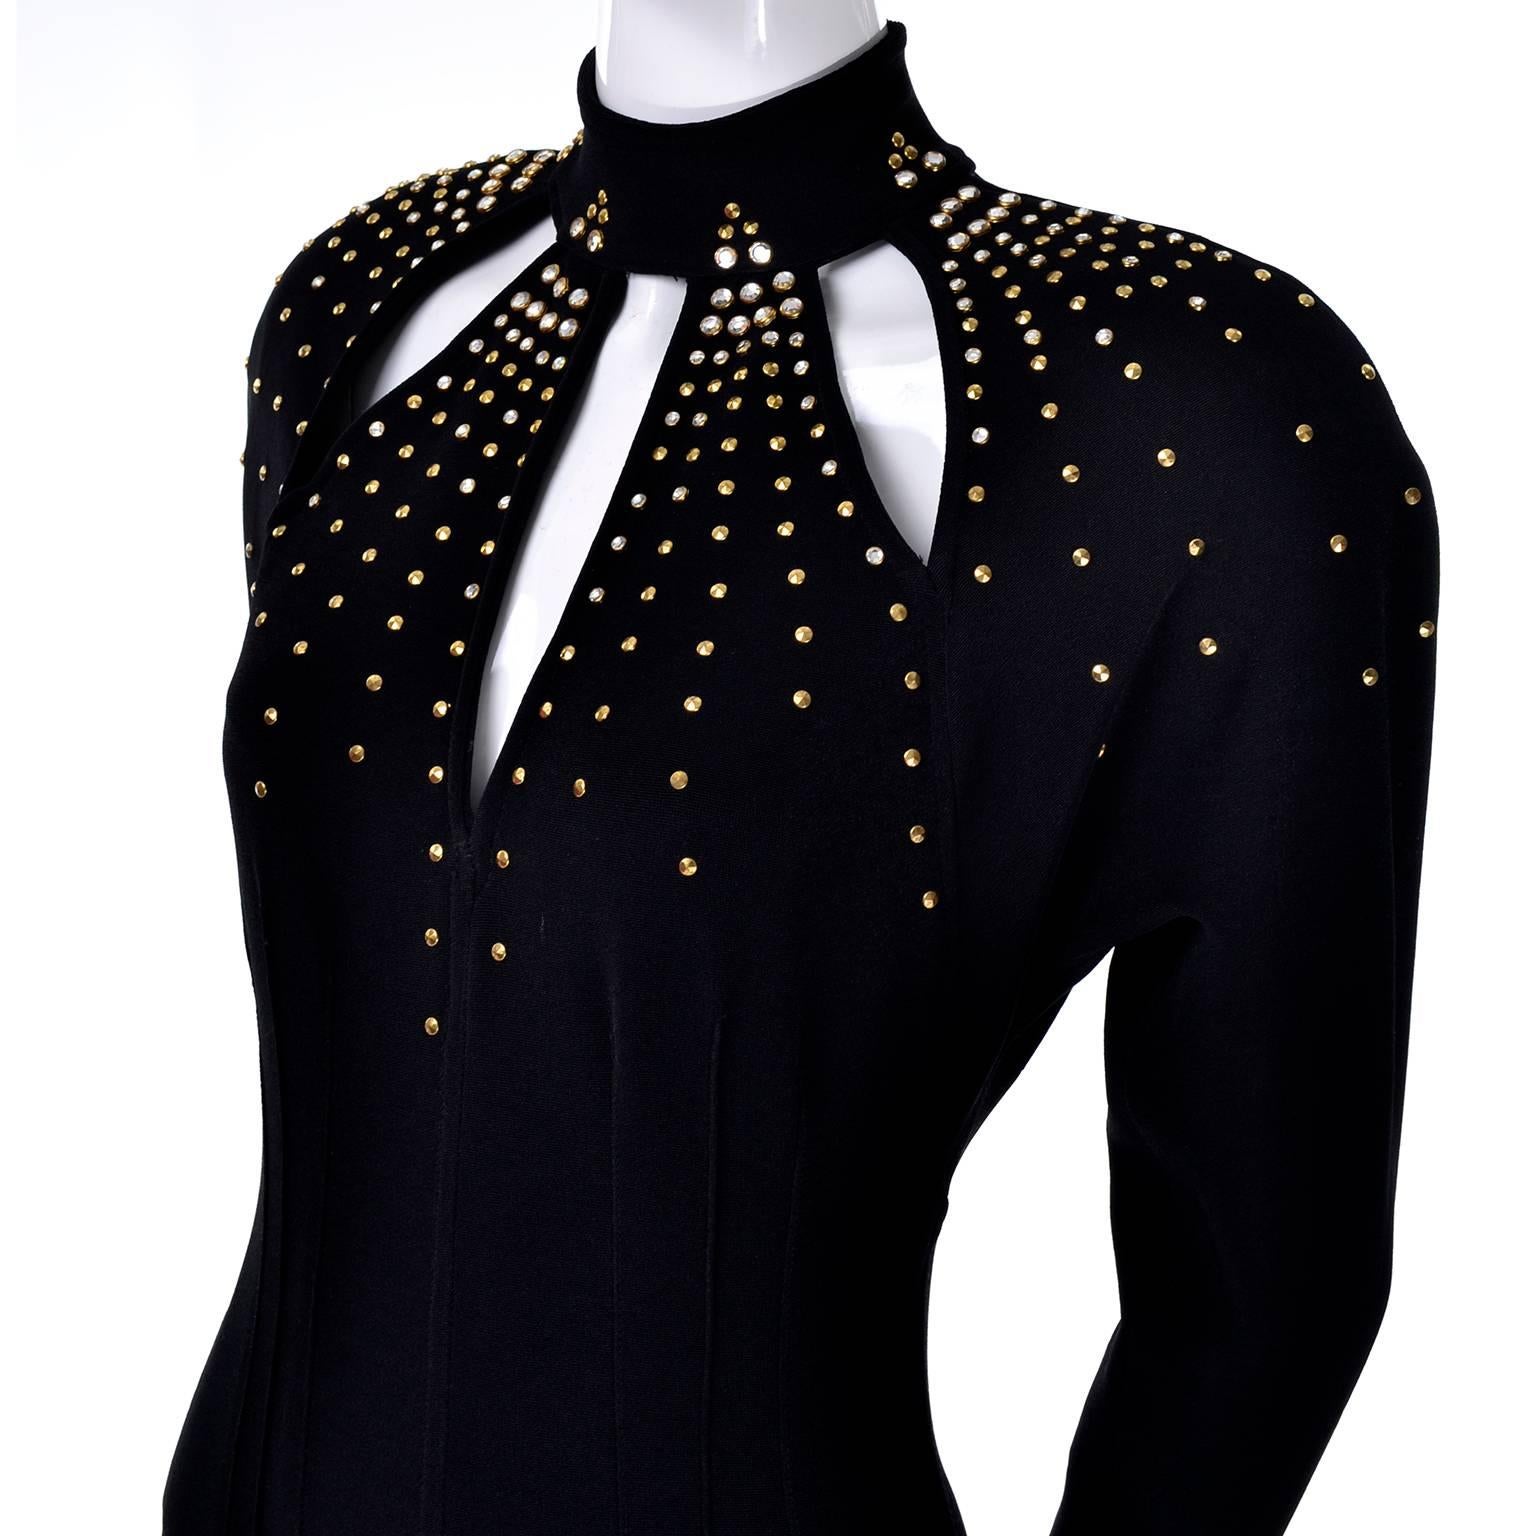 This stunning stretchy black jumpsuit is by Tadashi with triangle cutouts on the bust, adorned with gold studs and clear gems. This 1980s jumpsuit has shoulder pads under the raglan long sleeves. The ankles are tapered and have elastic stirrups. The